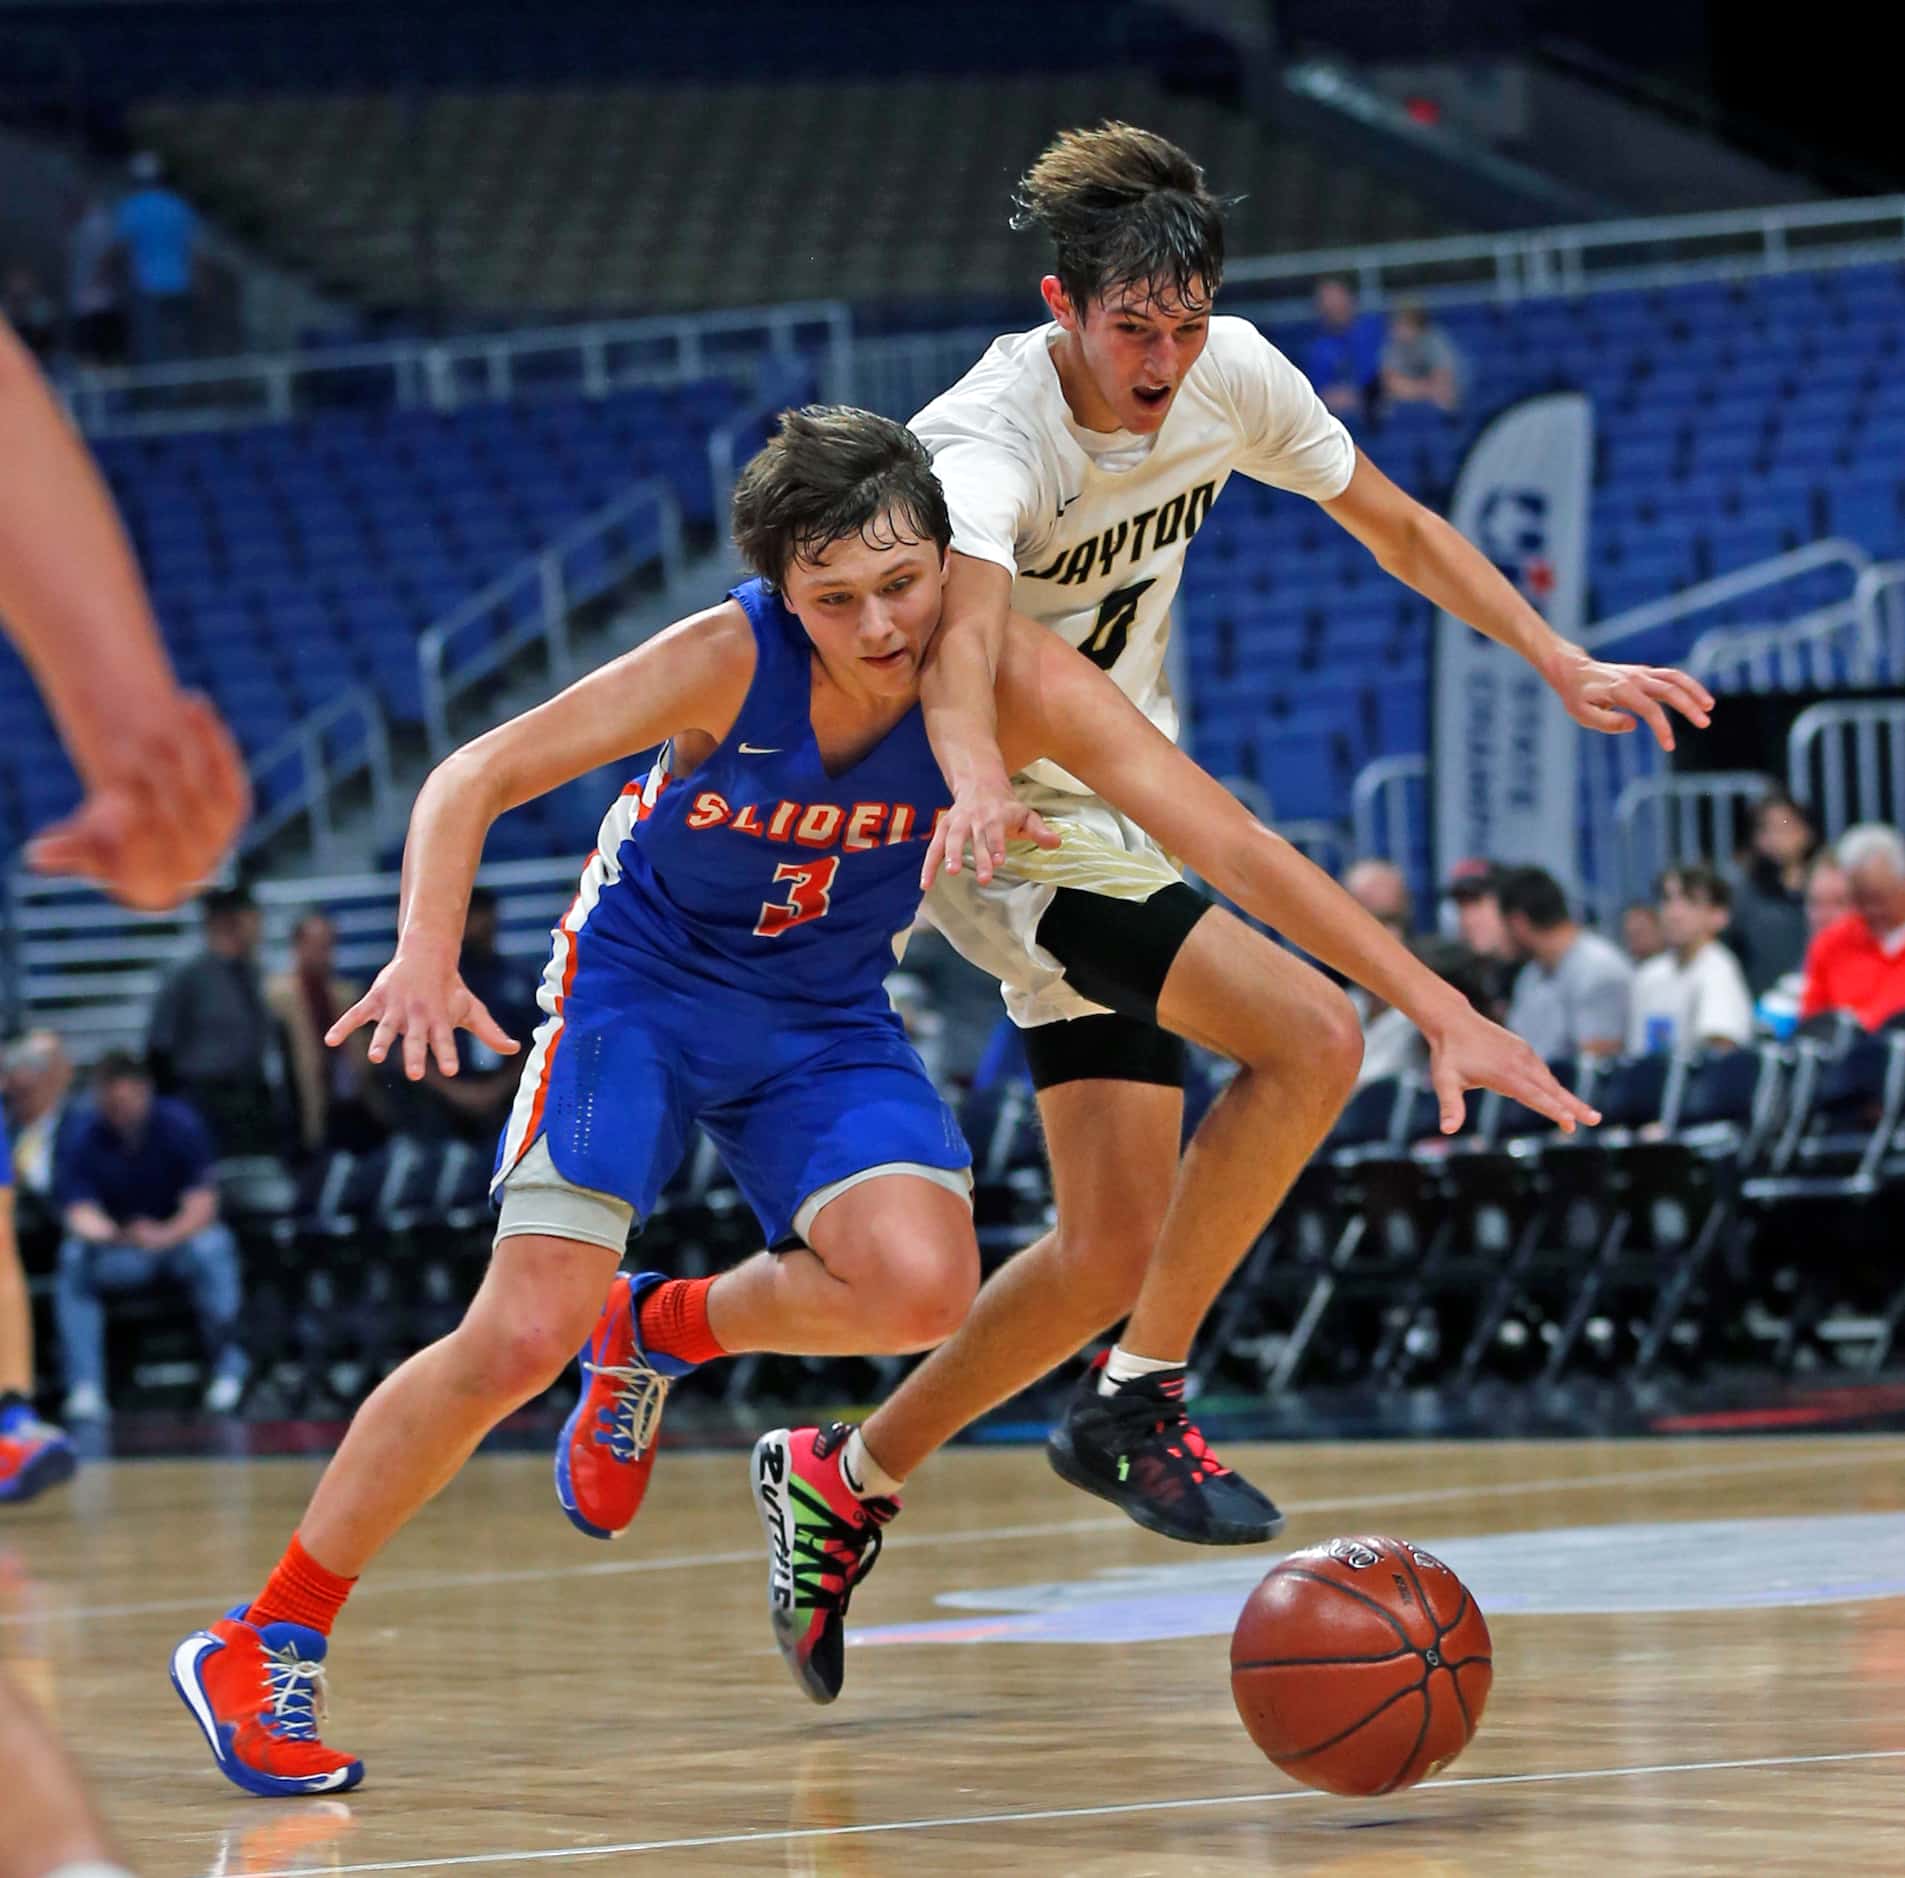 Slidell guard Brock Harwell #3 goes for a loose ball with Jayton center Alex Chisum #4....